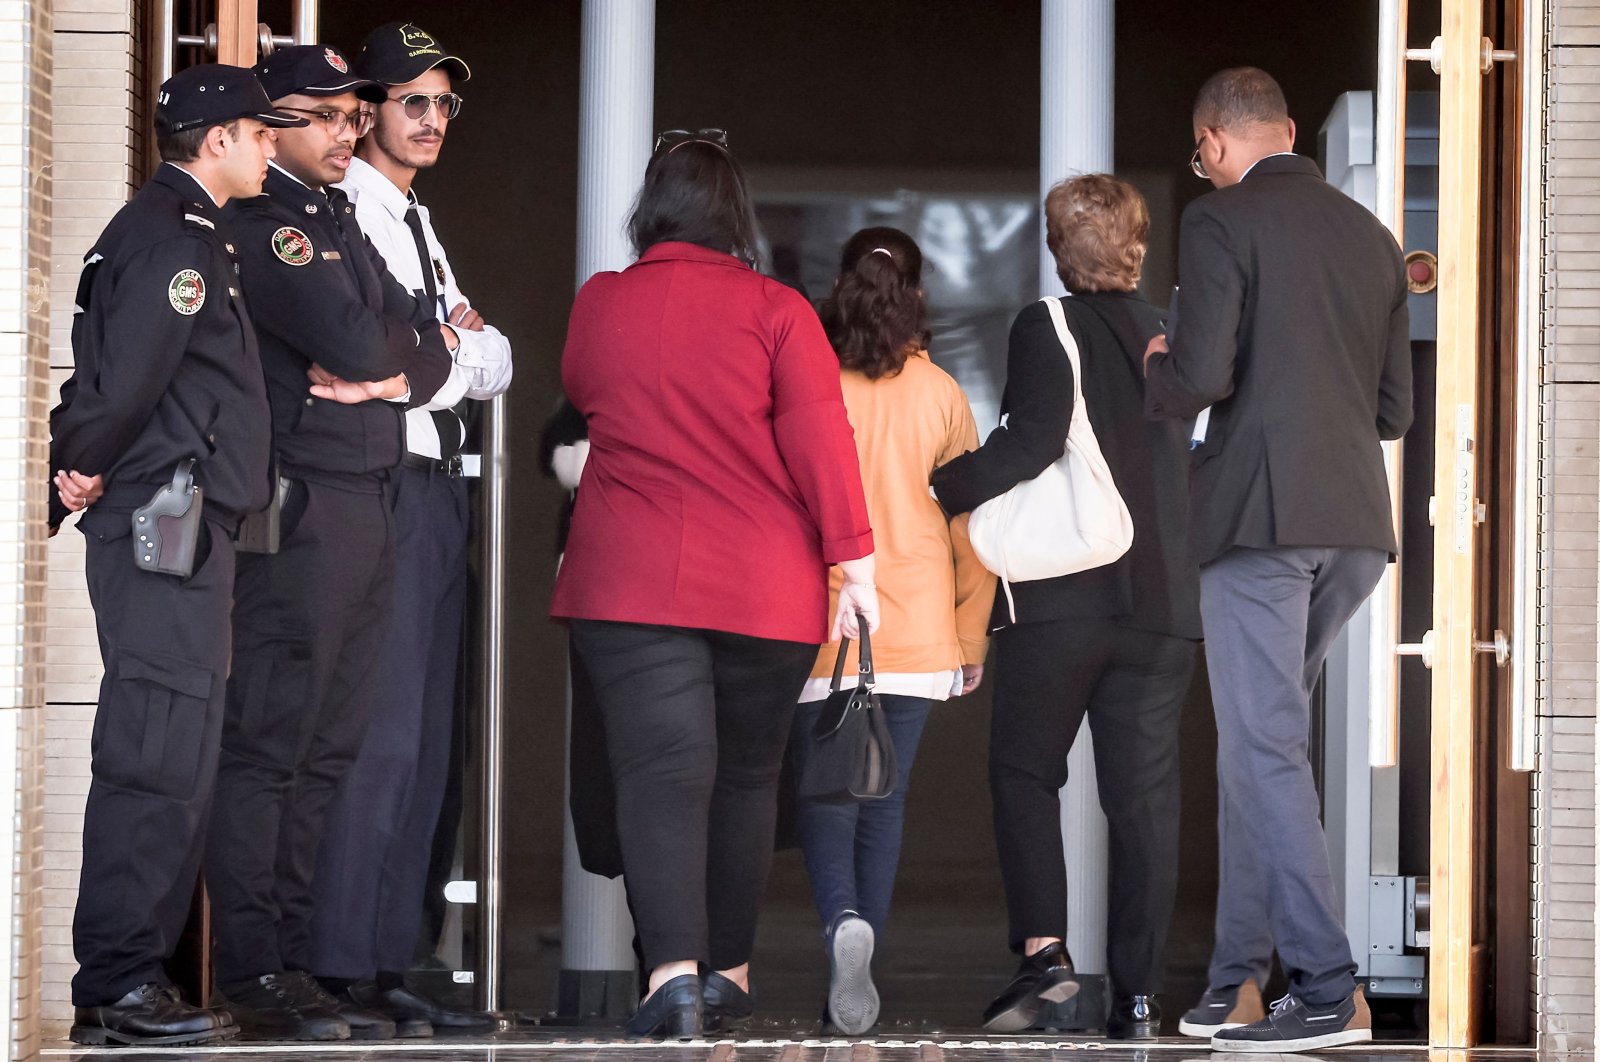 A young Moroccan girl (orange jacket) who was repeatedly raped when she was 11-years old, enters the tribunal before the trial of three men accused of the sexual aggression, Rabat, Morocco, April 13, 2023. (AFP Photo)